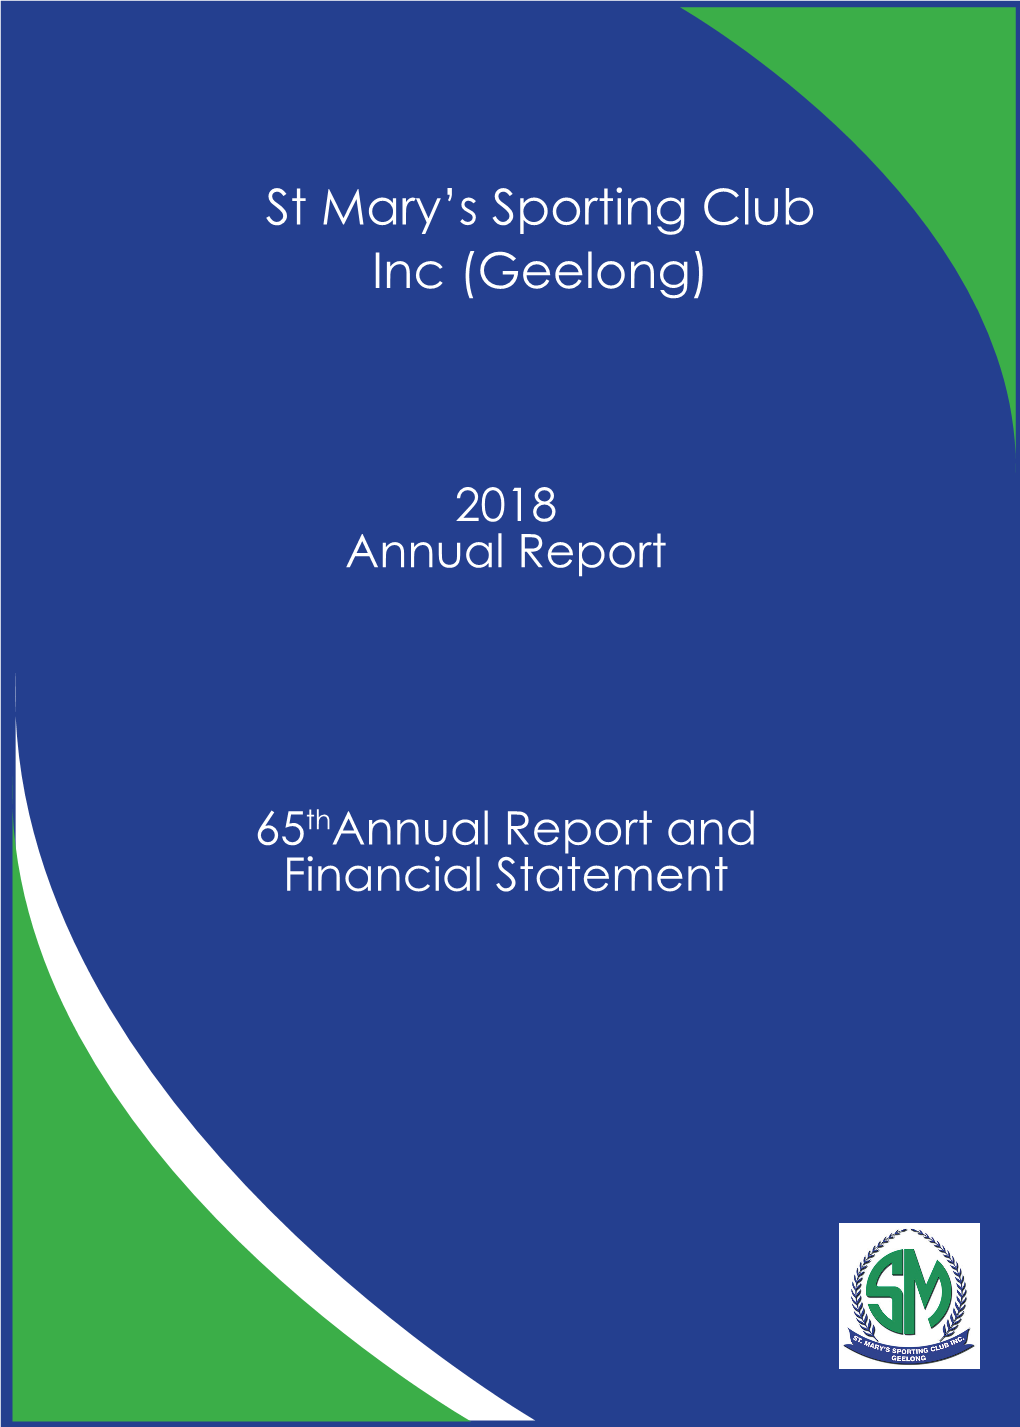 St Mary's Sporting Club Inc (Geelong)